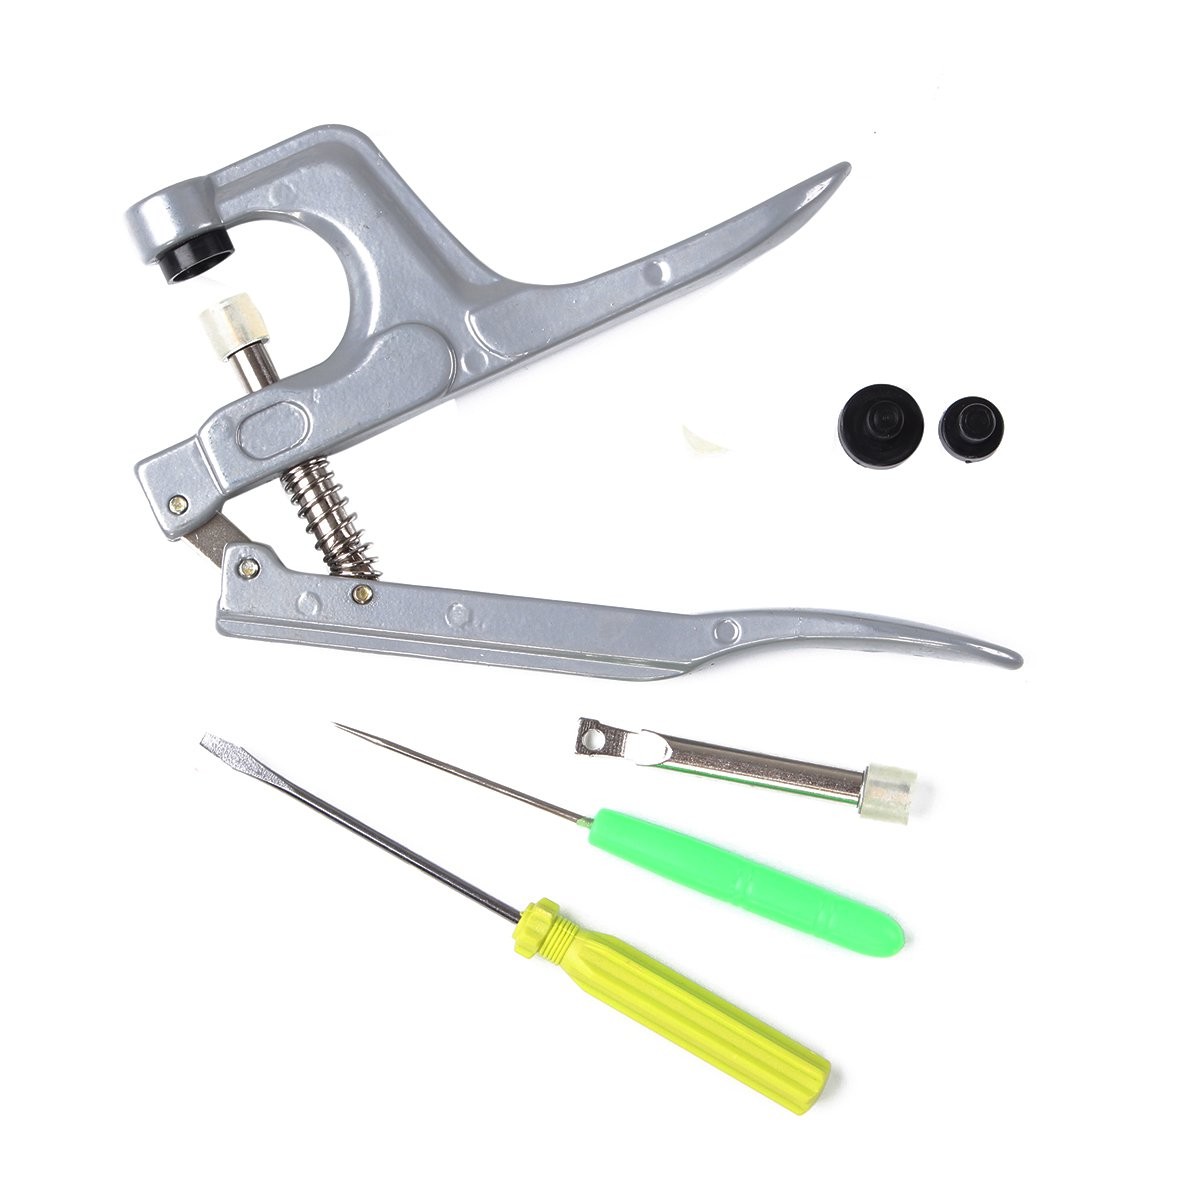 300-Complete-Sets-Plastic-Resin-Kam-Snaps-Fasteners-Plier-with-T5-Press-Poppers-1094817